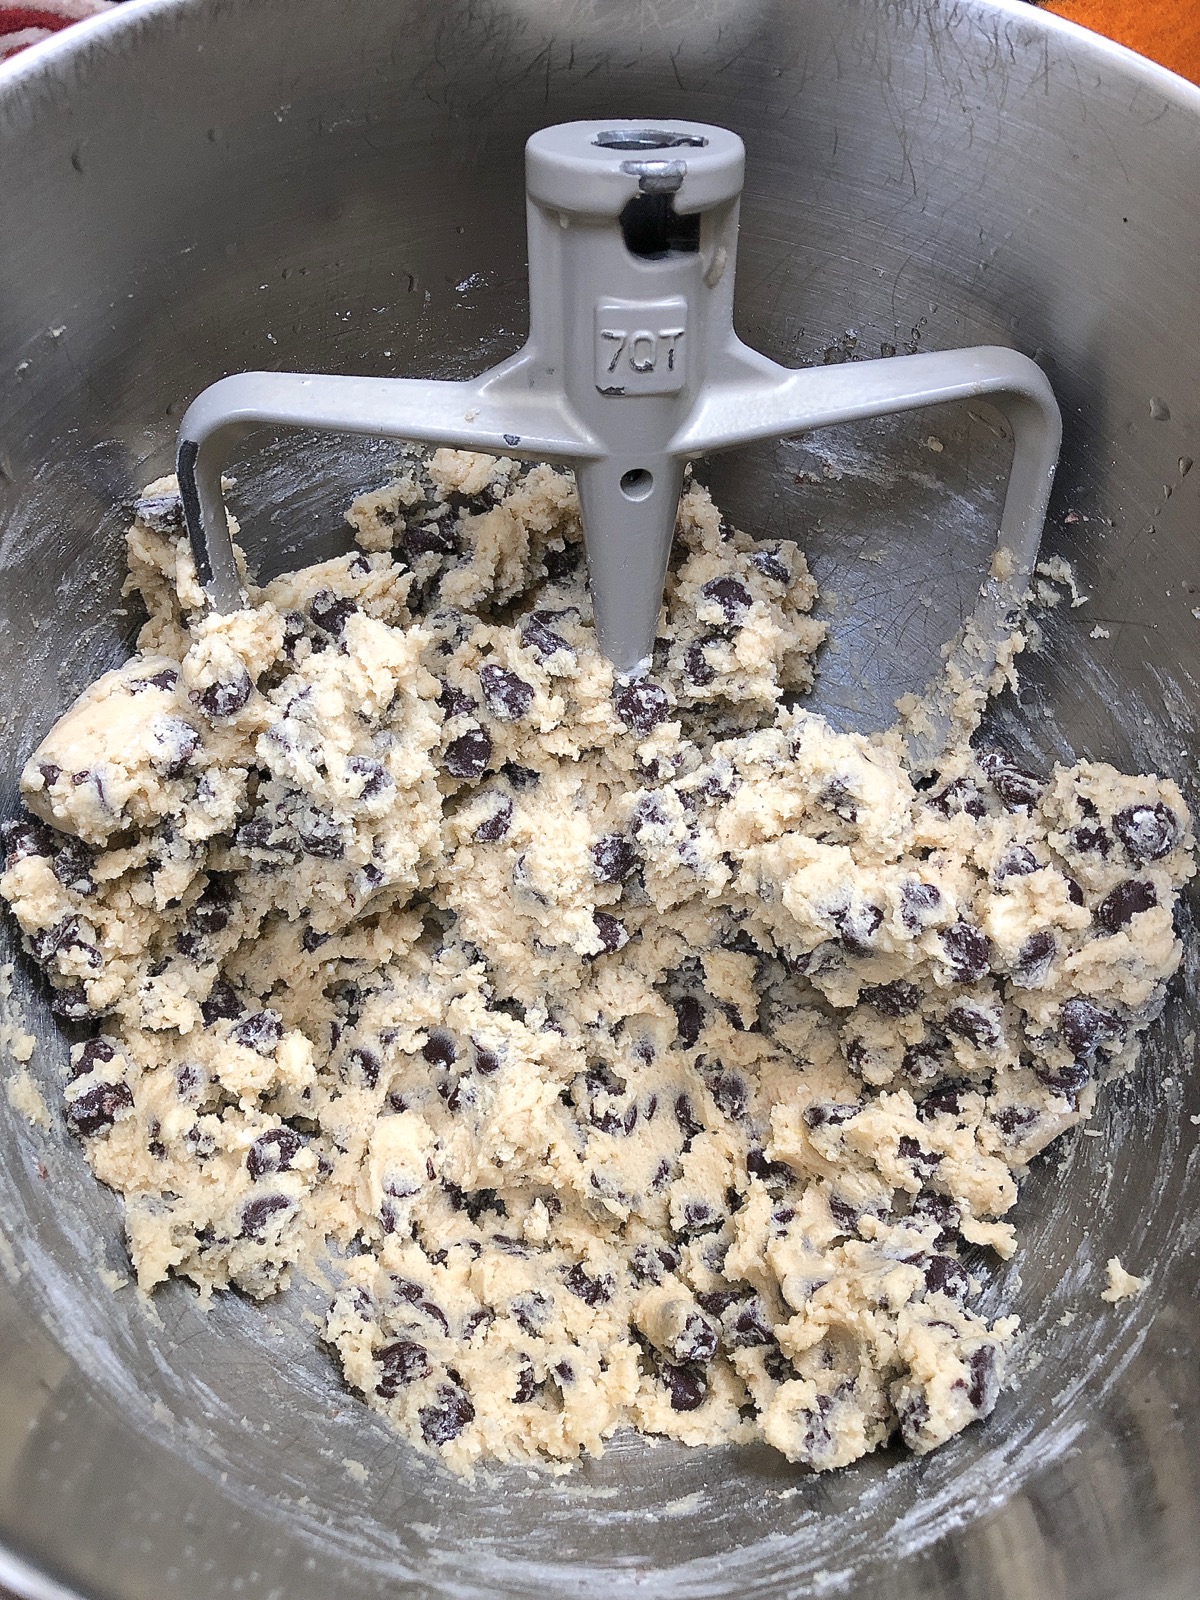 Bowl of chocolate chip cookie dough, ready to scoop.